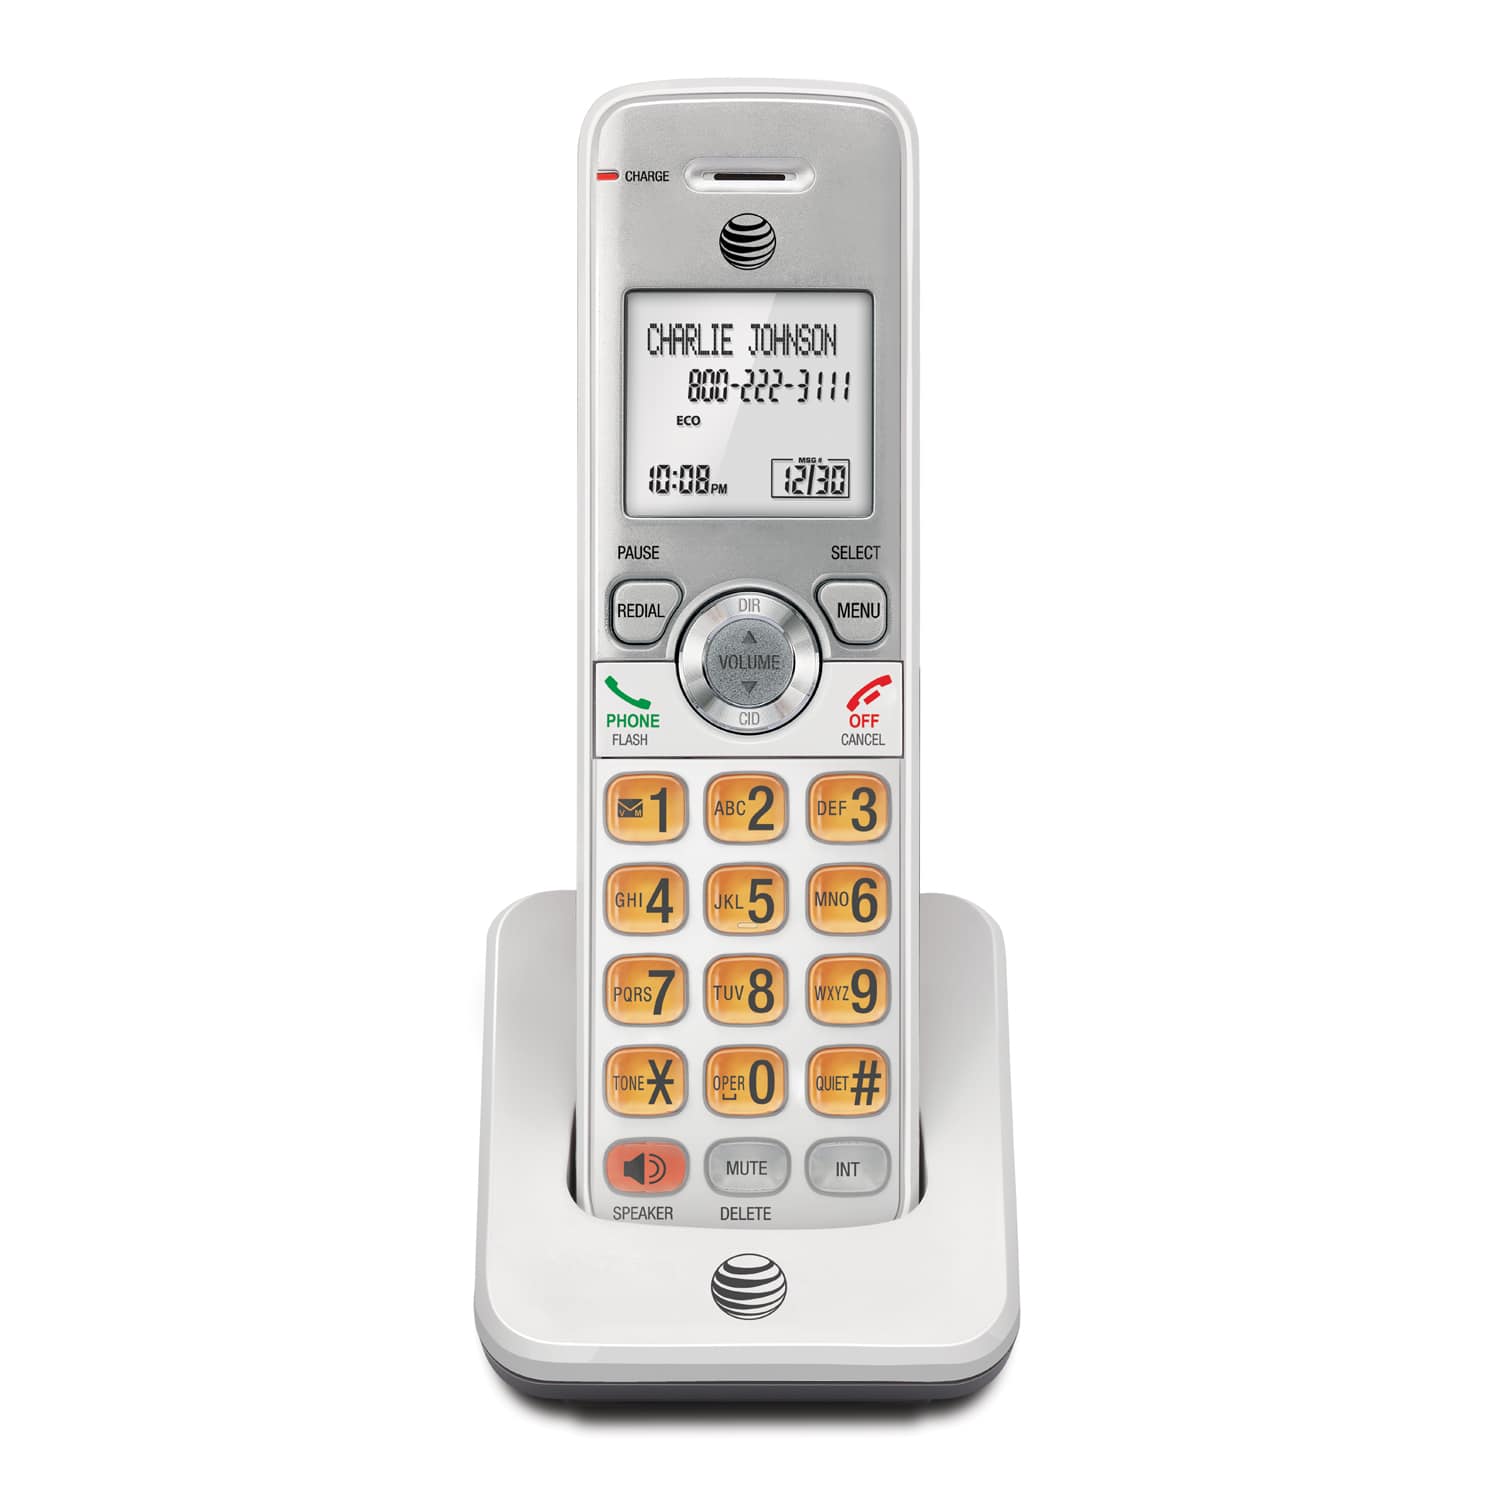 Accessory handset with Caller ID/call waiting - view 1